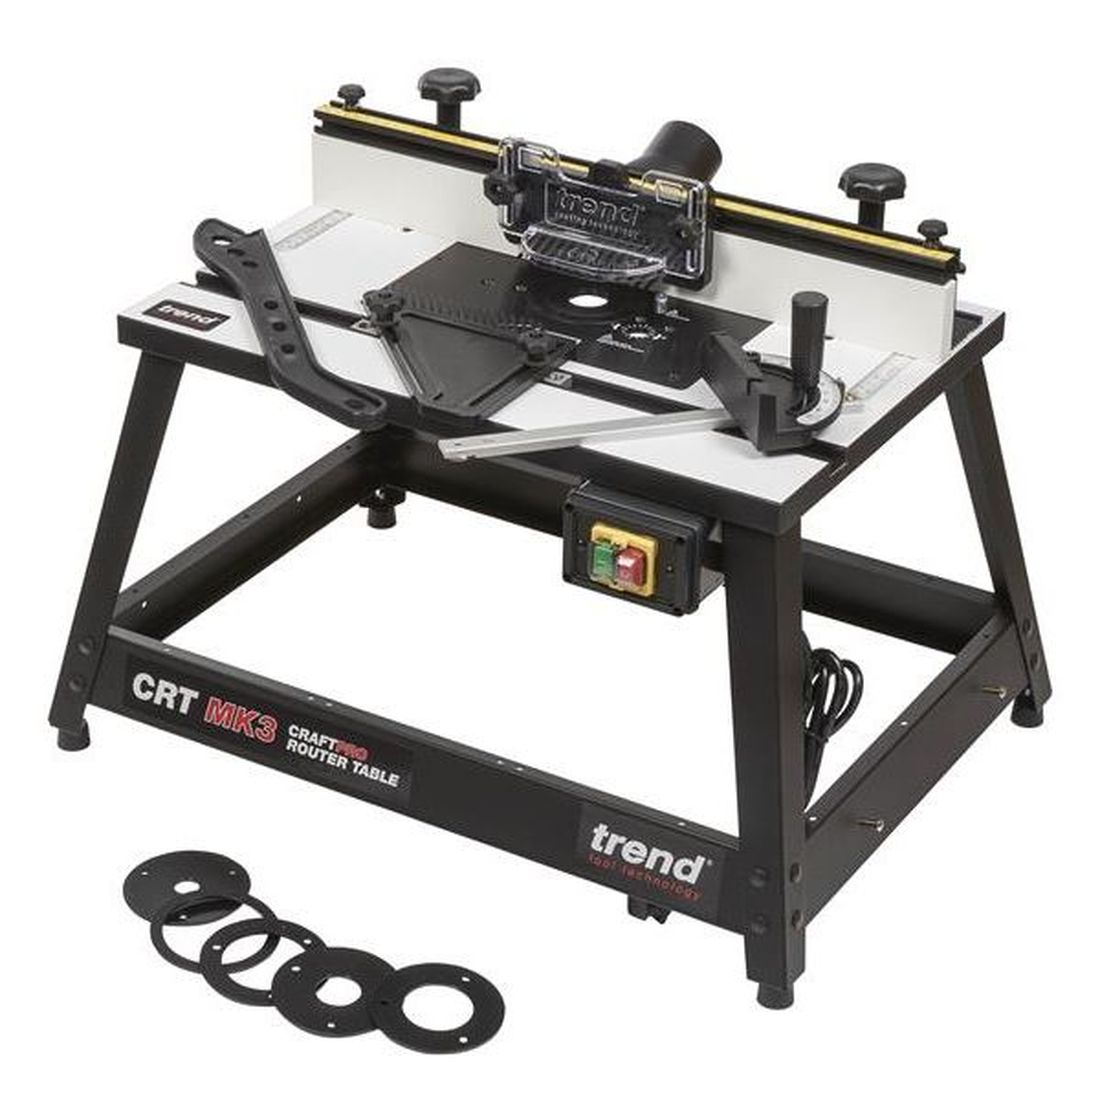 Trend CRT/MK3 CraftPro Router Table 240V HSS Hire